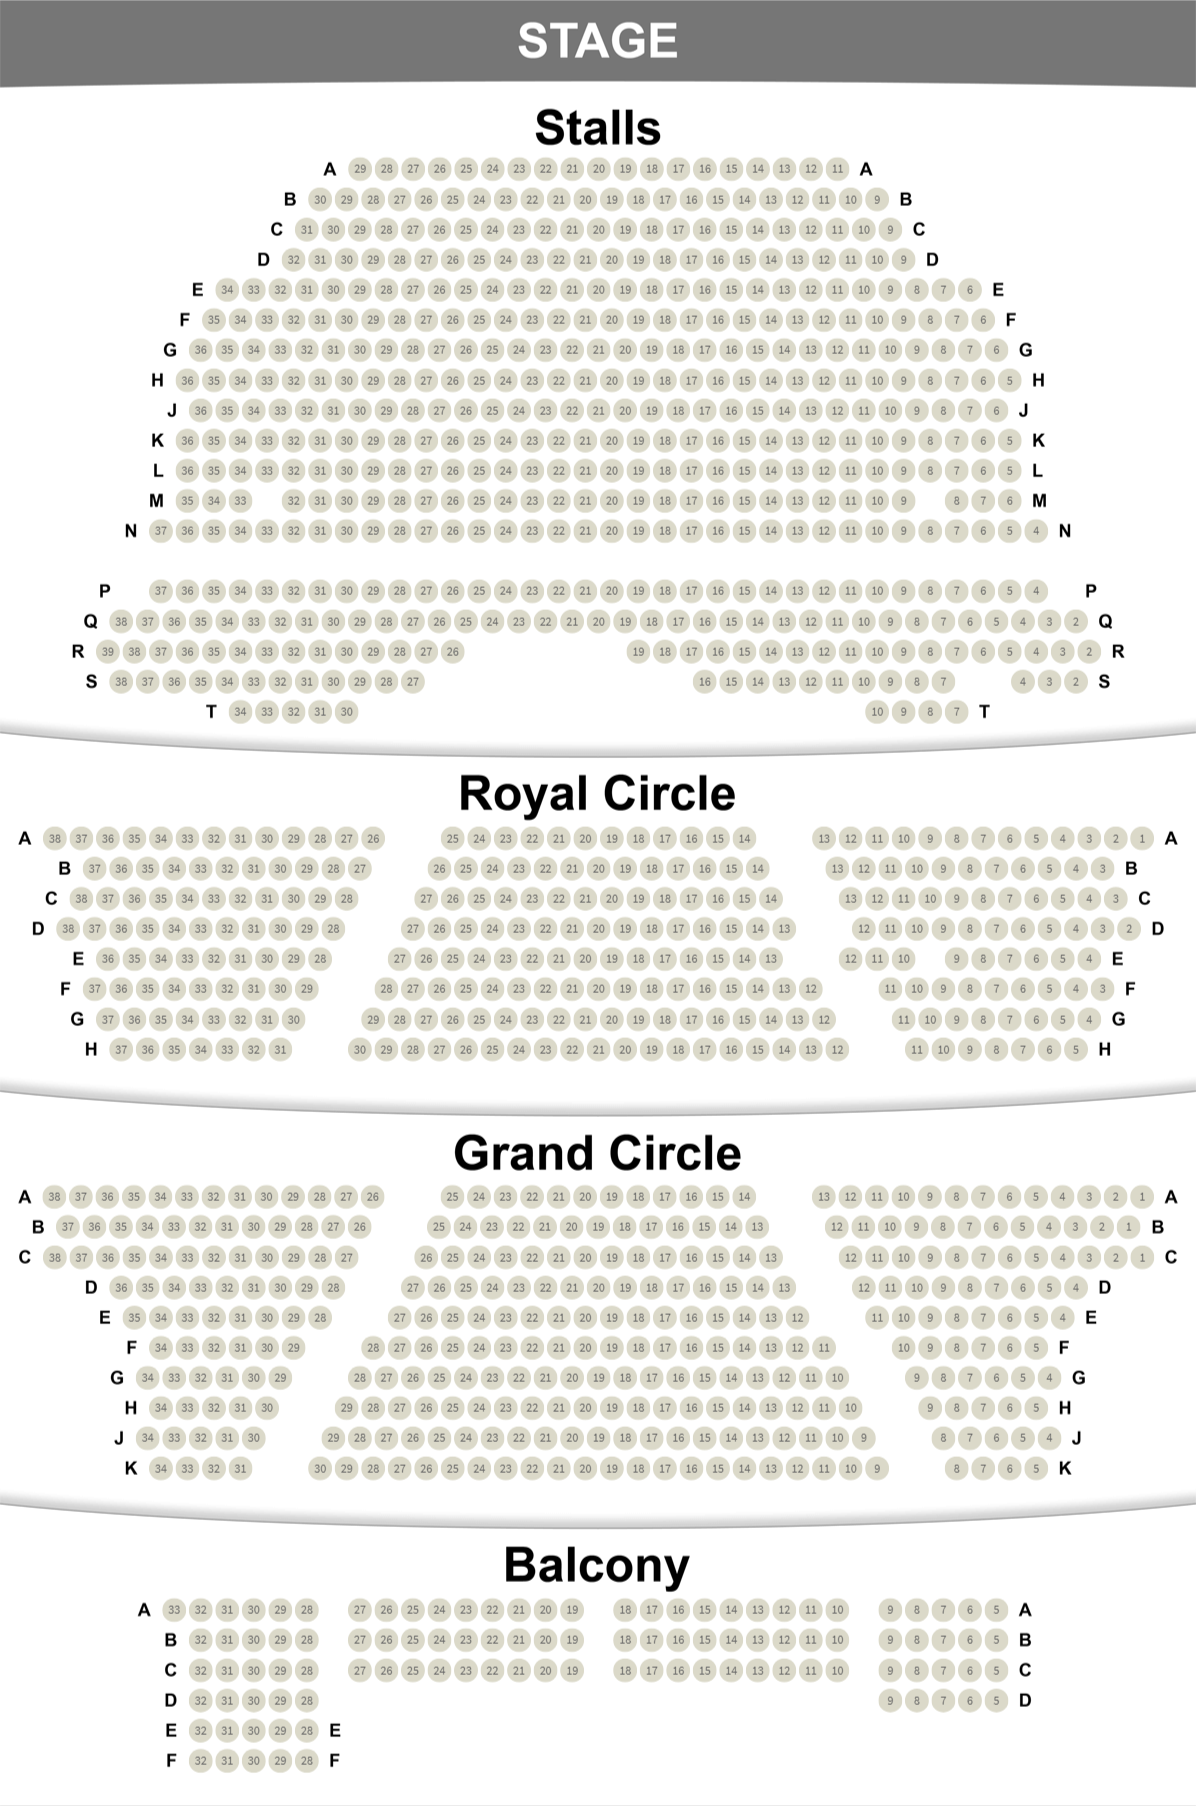 Her Majesty's Theatre seating plan